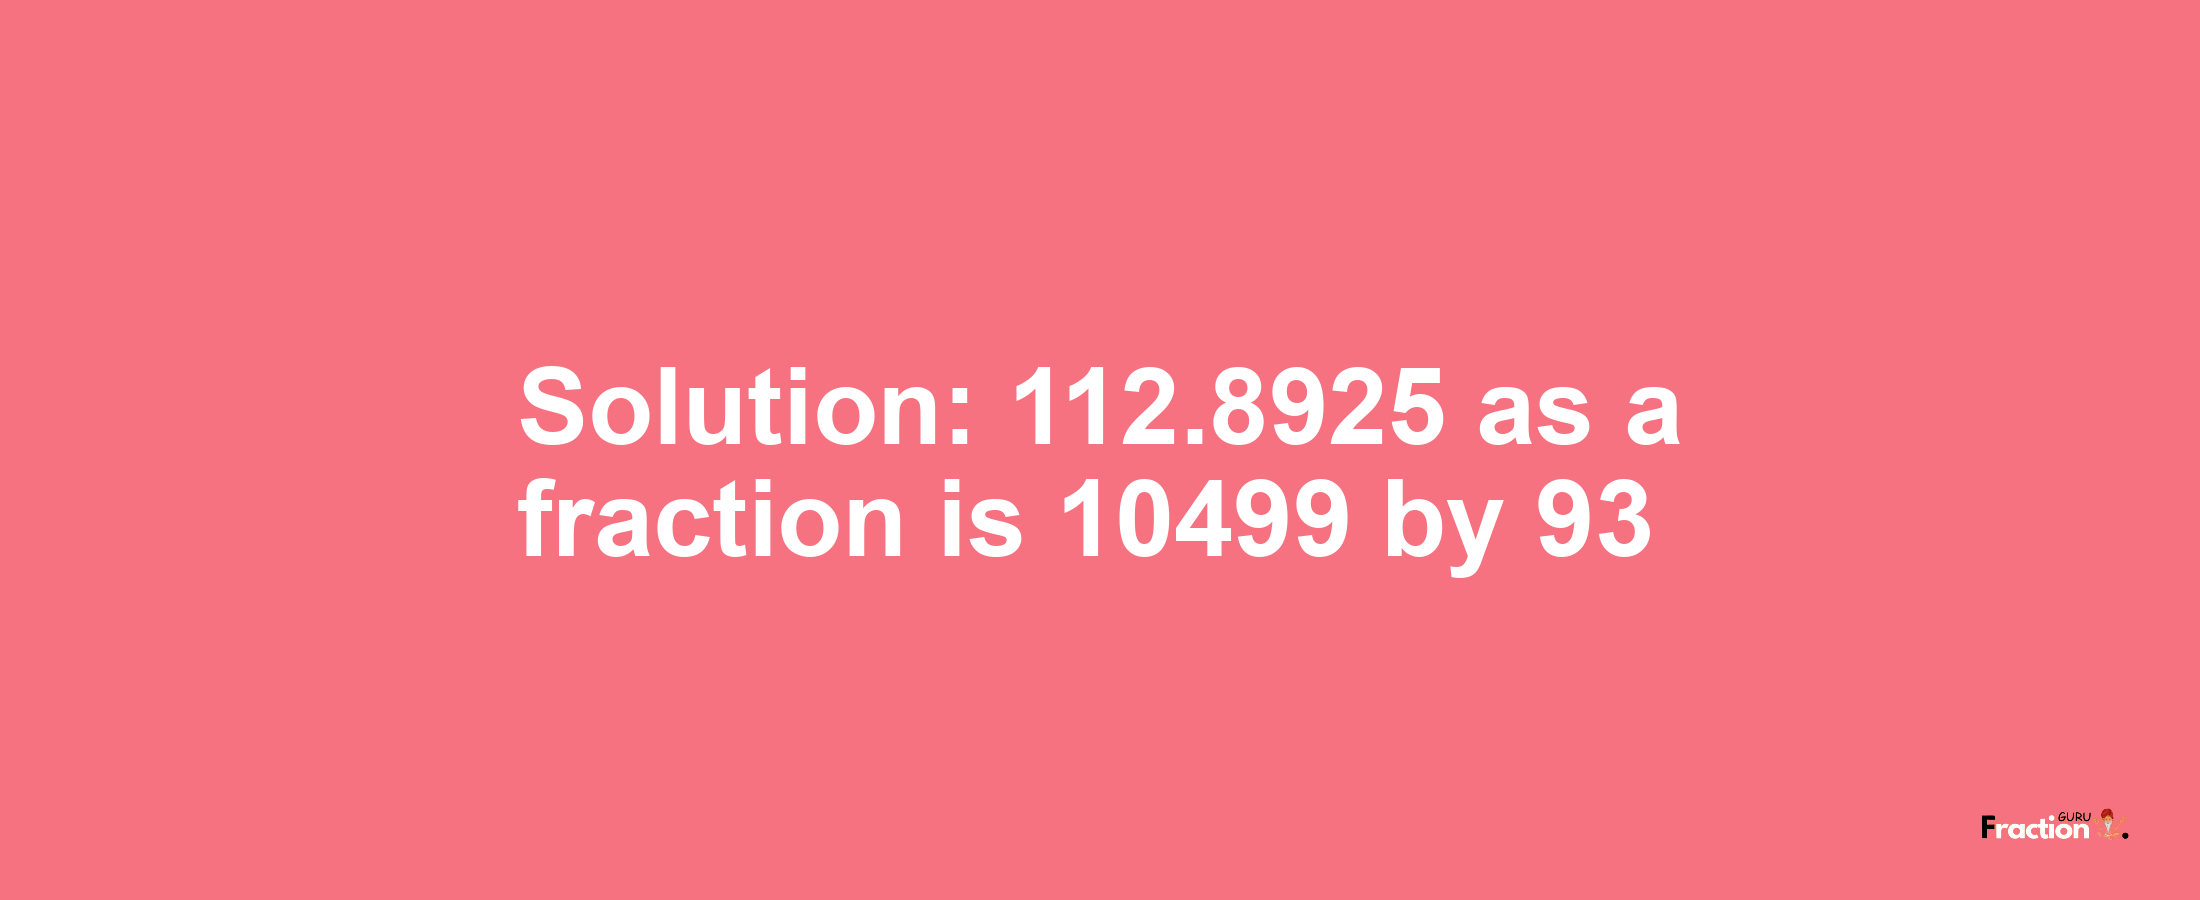 Solution:112.8925 as a fraction is 10499/93